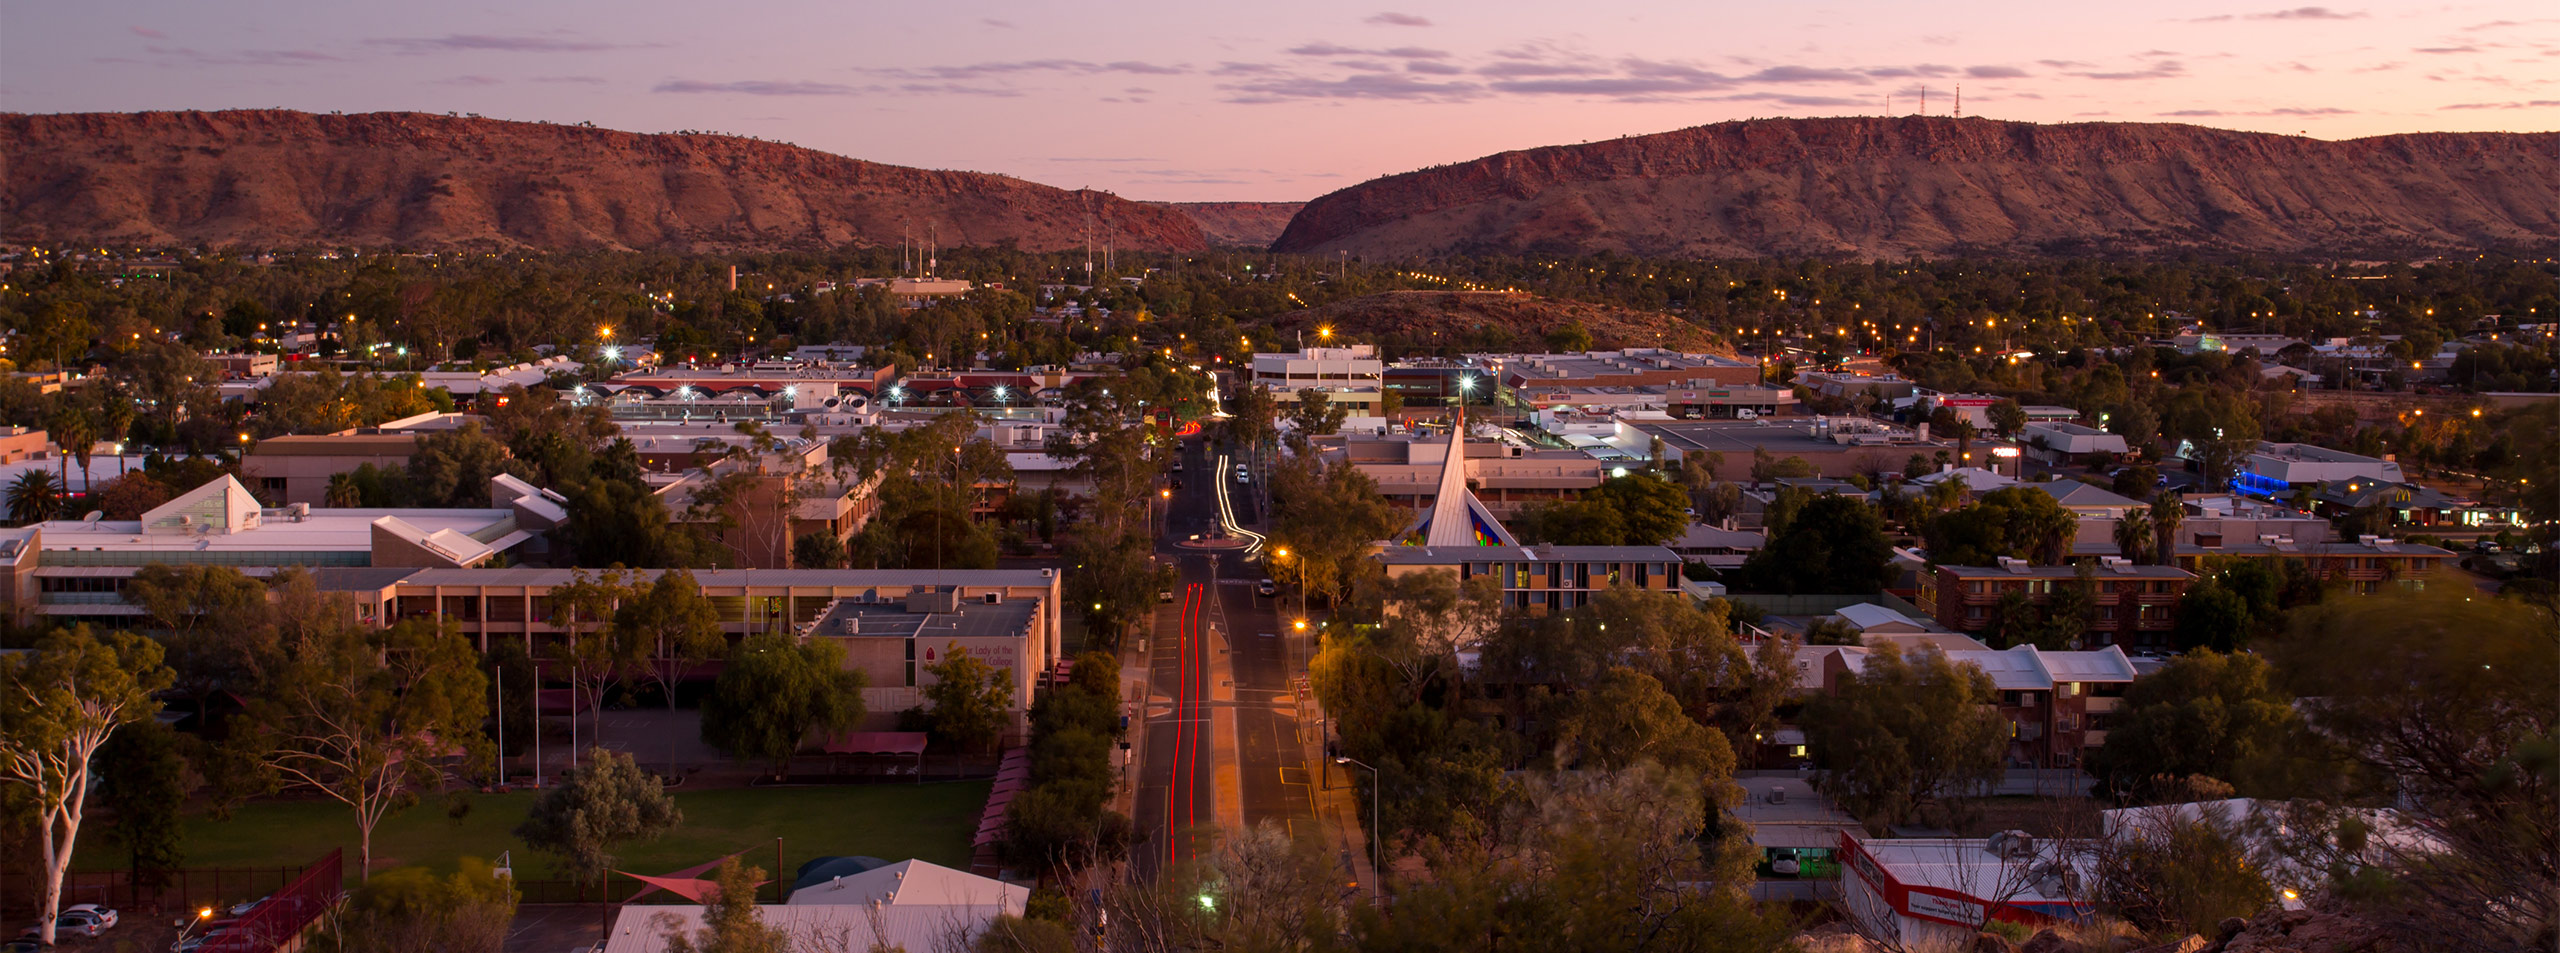 Alice Springs Town at Sunset